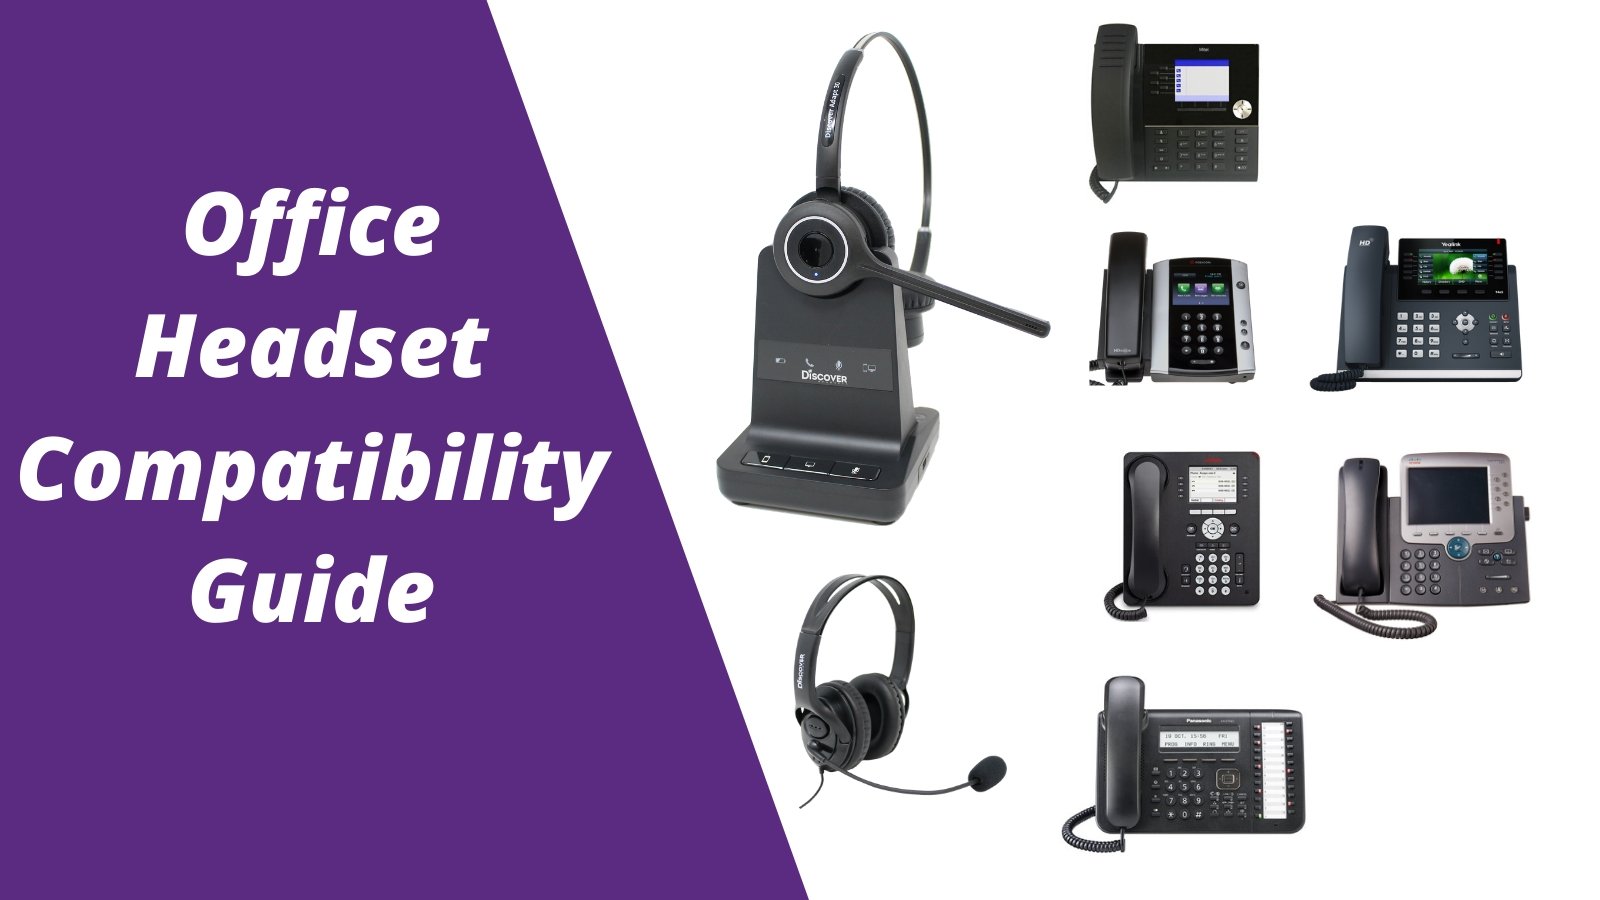 Office Headset Compatibility Guide For Desk Phones: Compatibility Made Easy - Headset Advisor